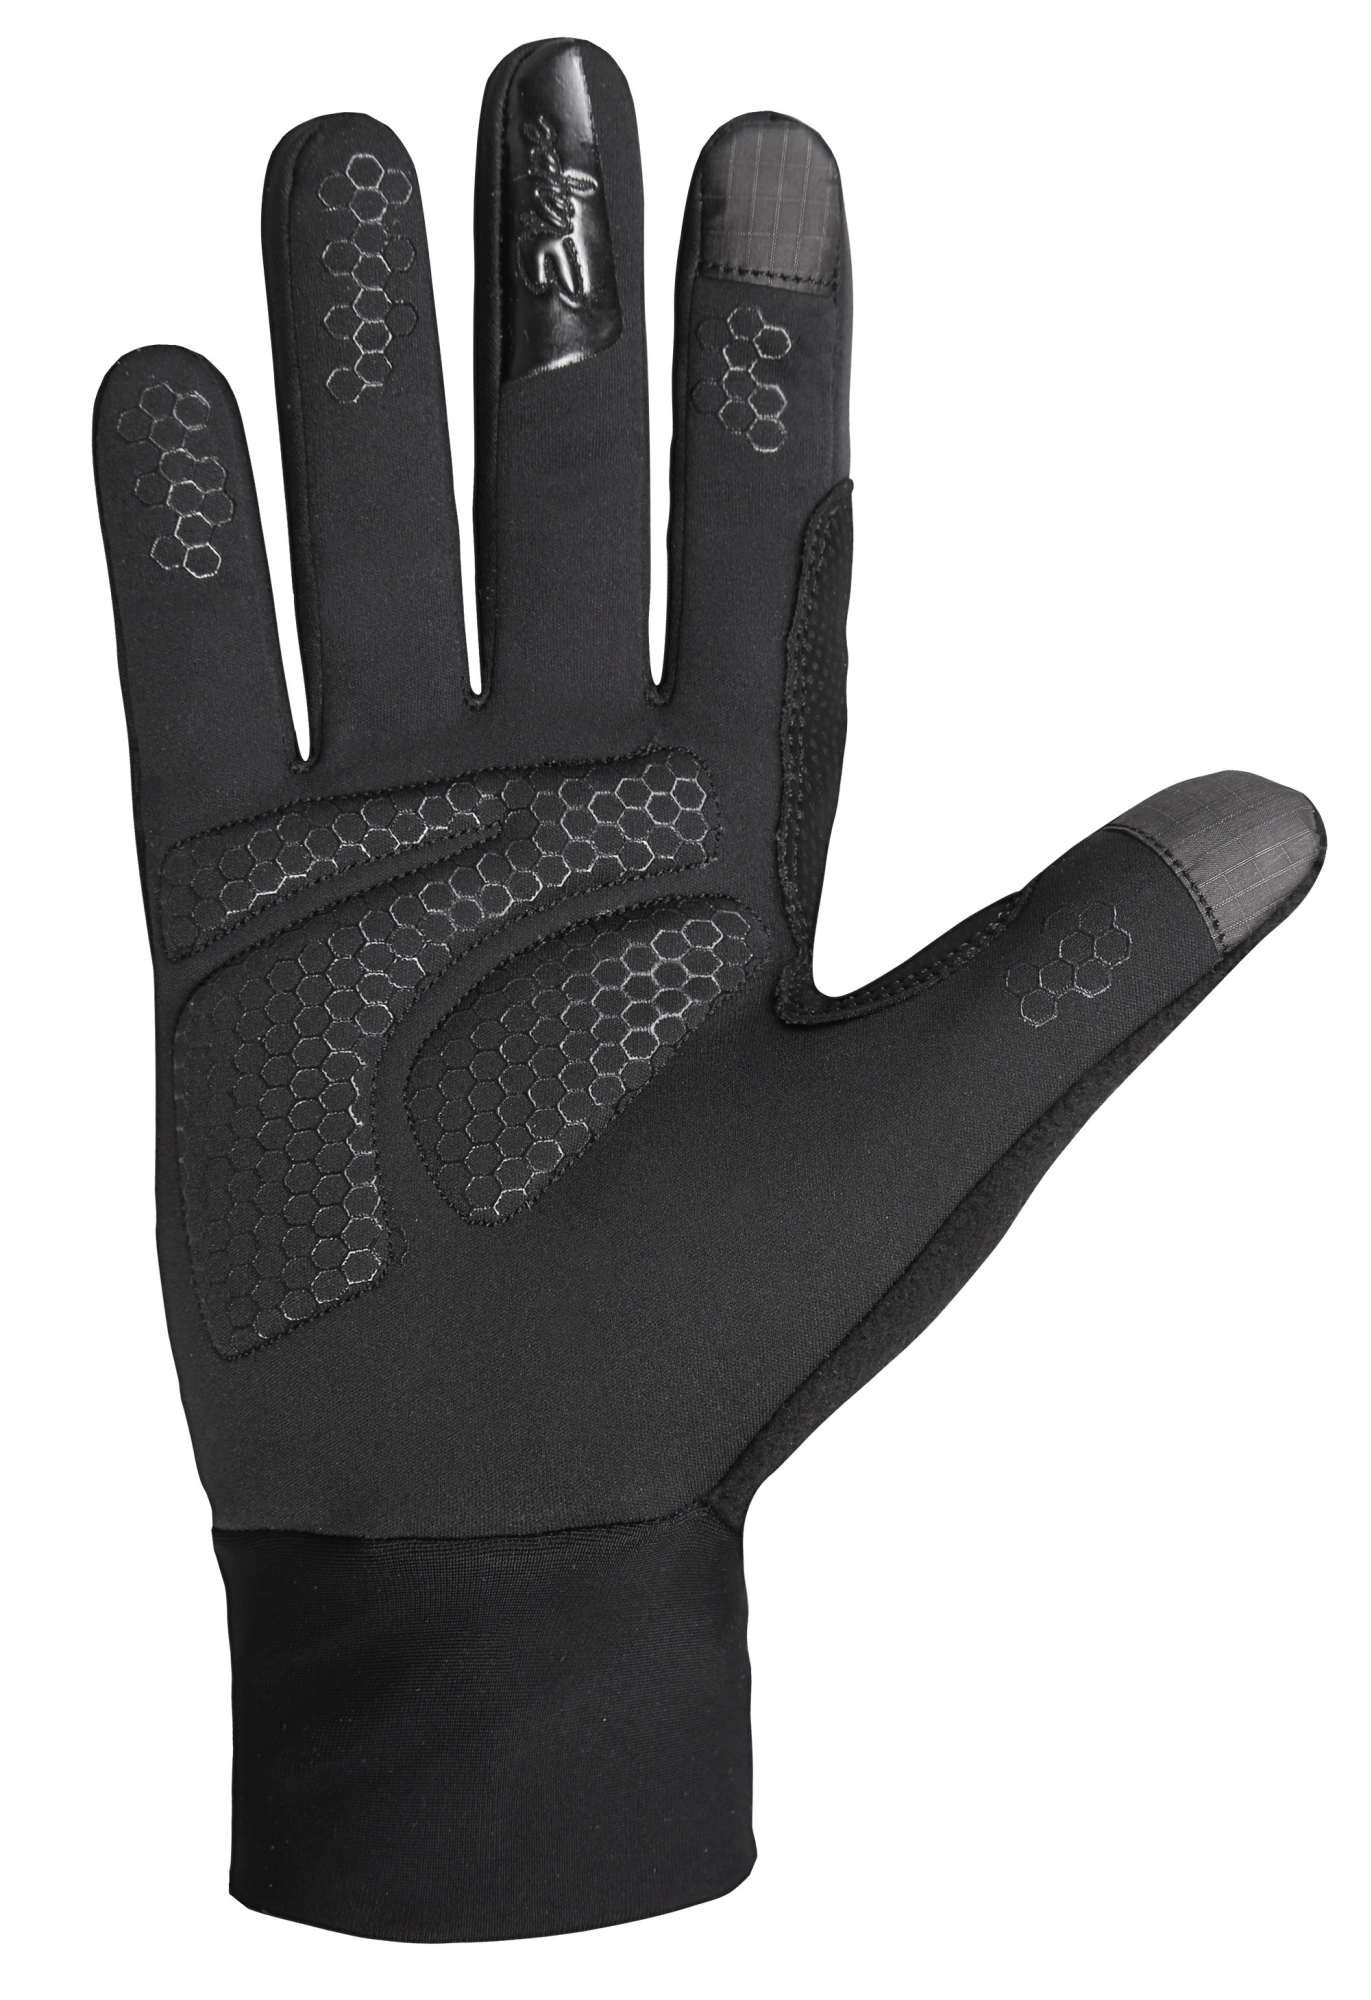 Women’s insulated gloves